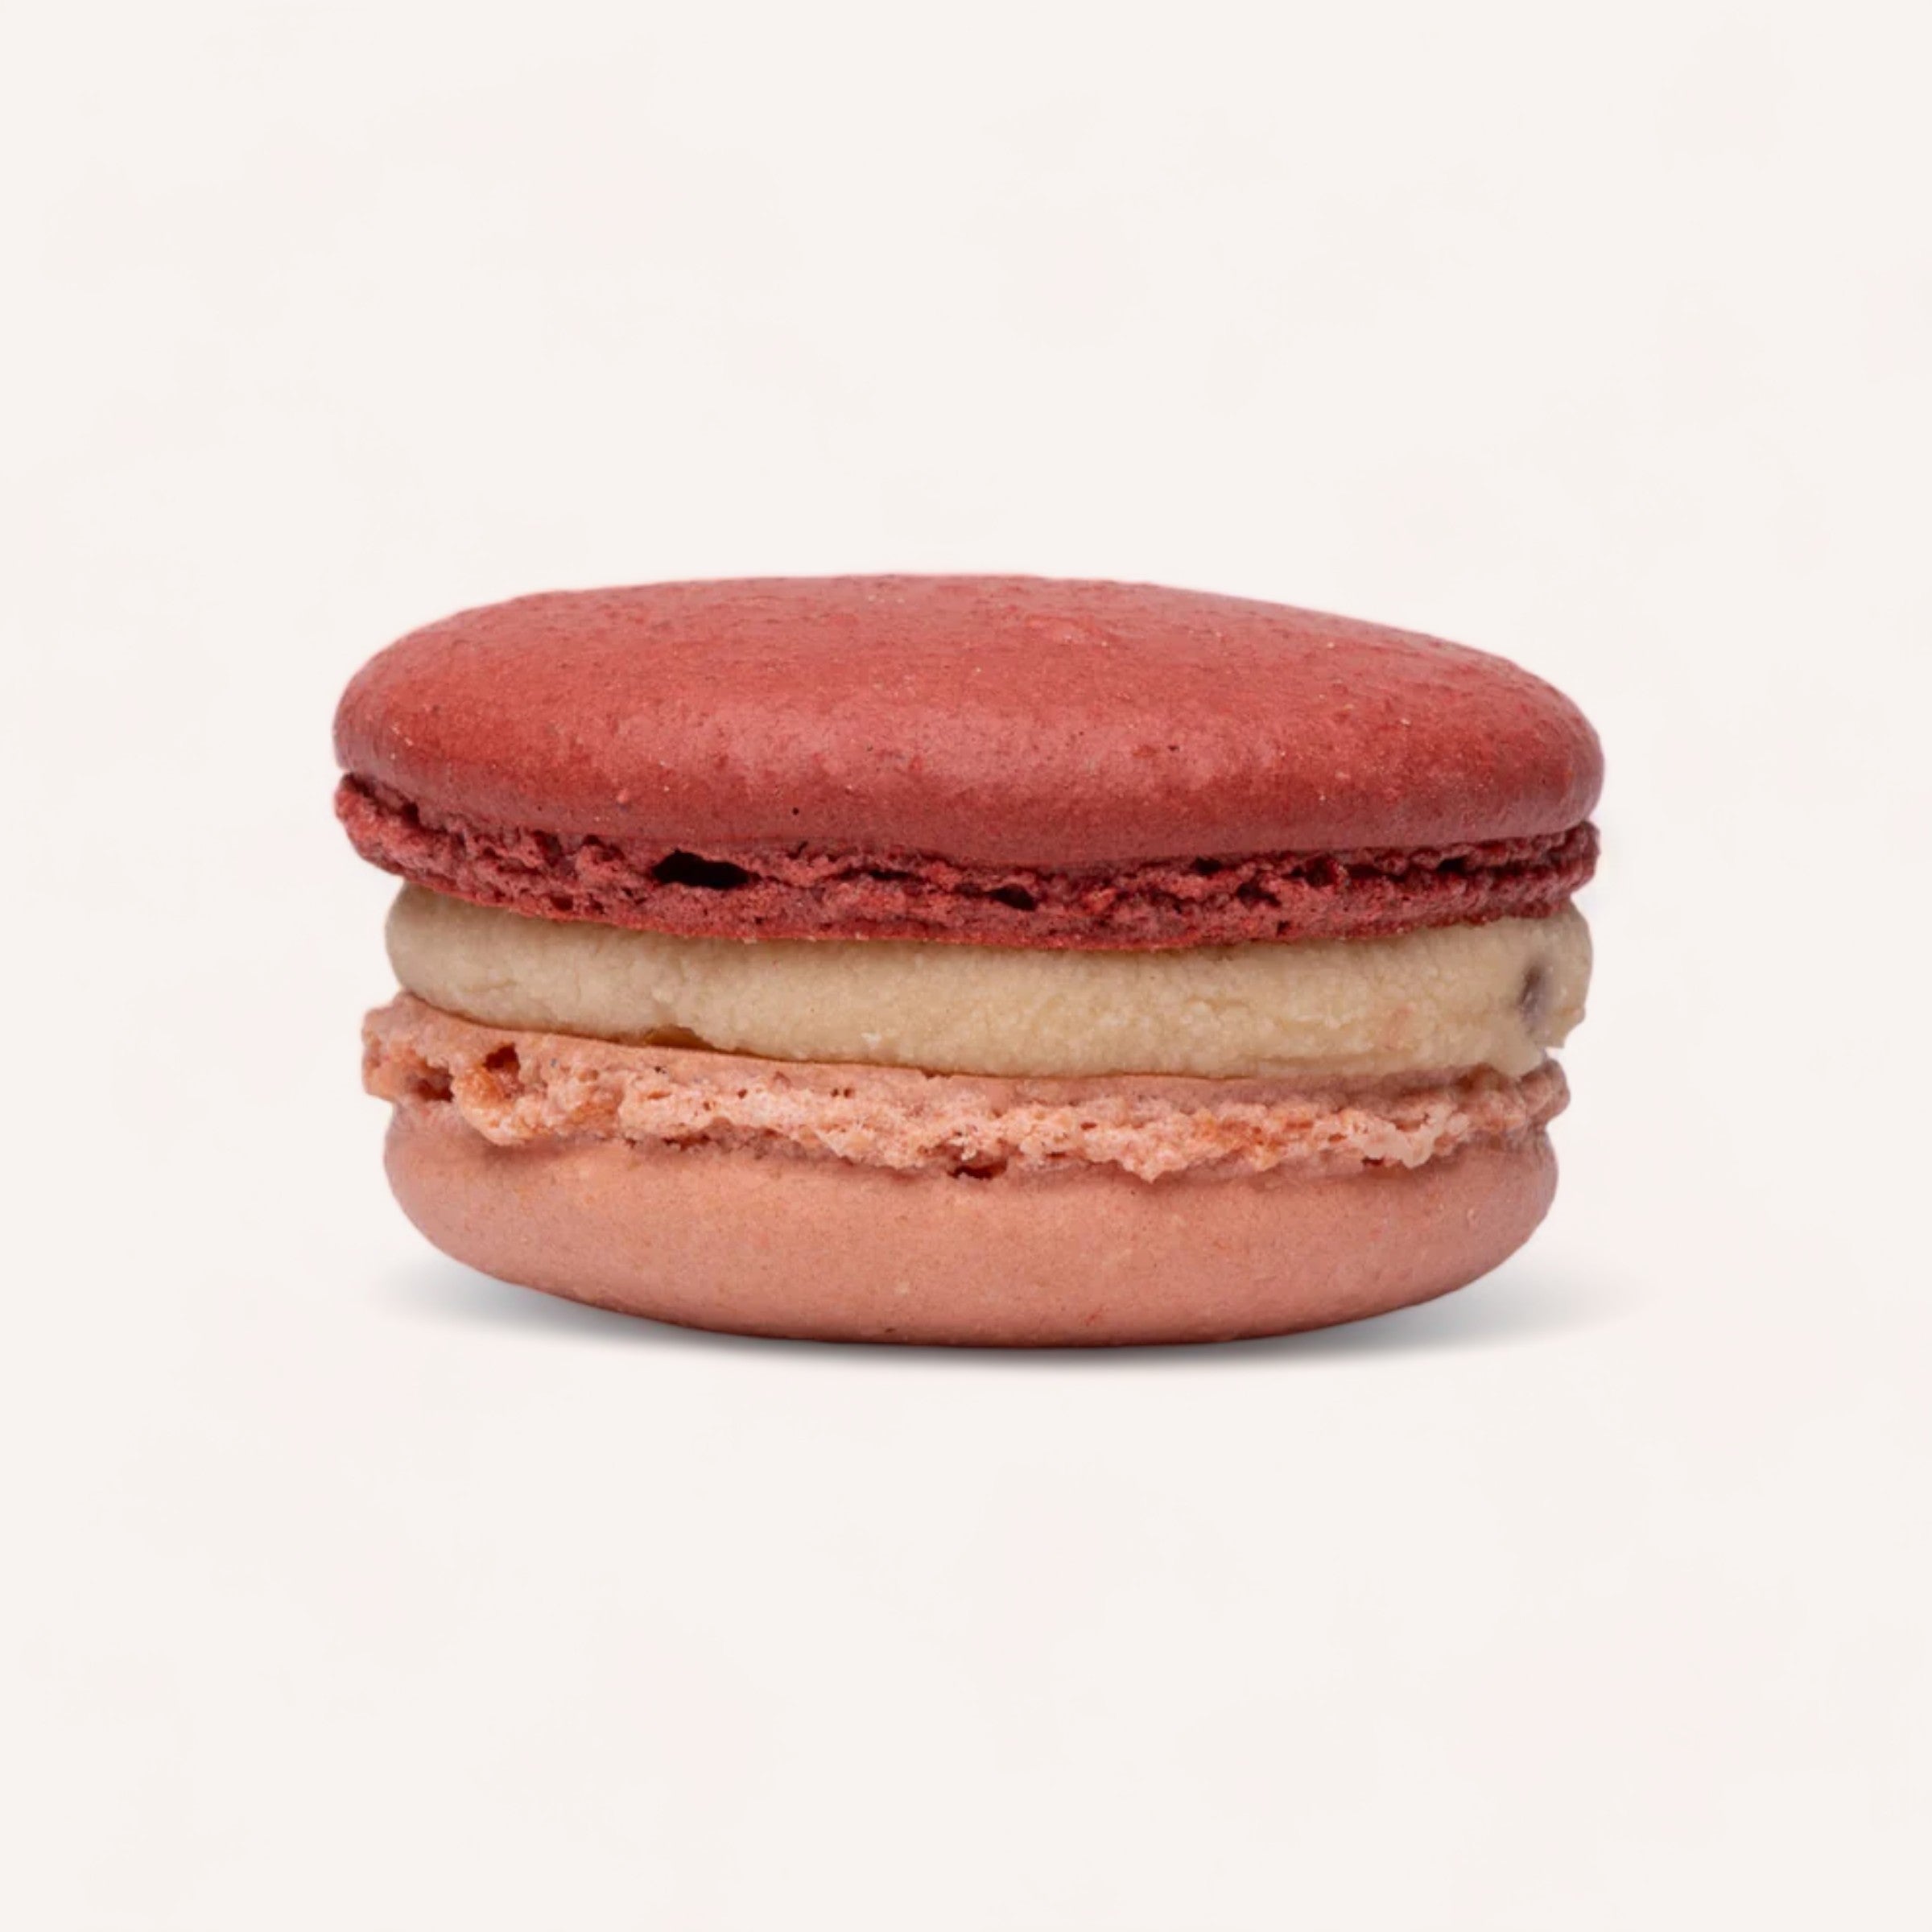 A single red, handmade macaron with a creamy filling from the Box of 12 Macarons by J'aime les Macarons, isolated on a white background.